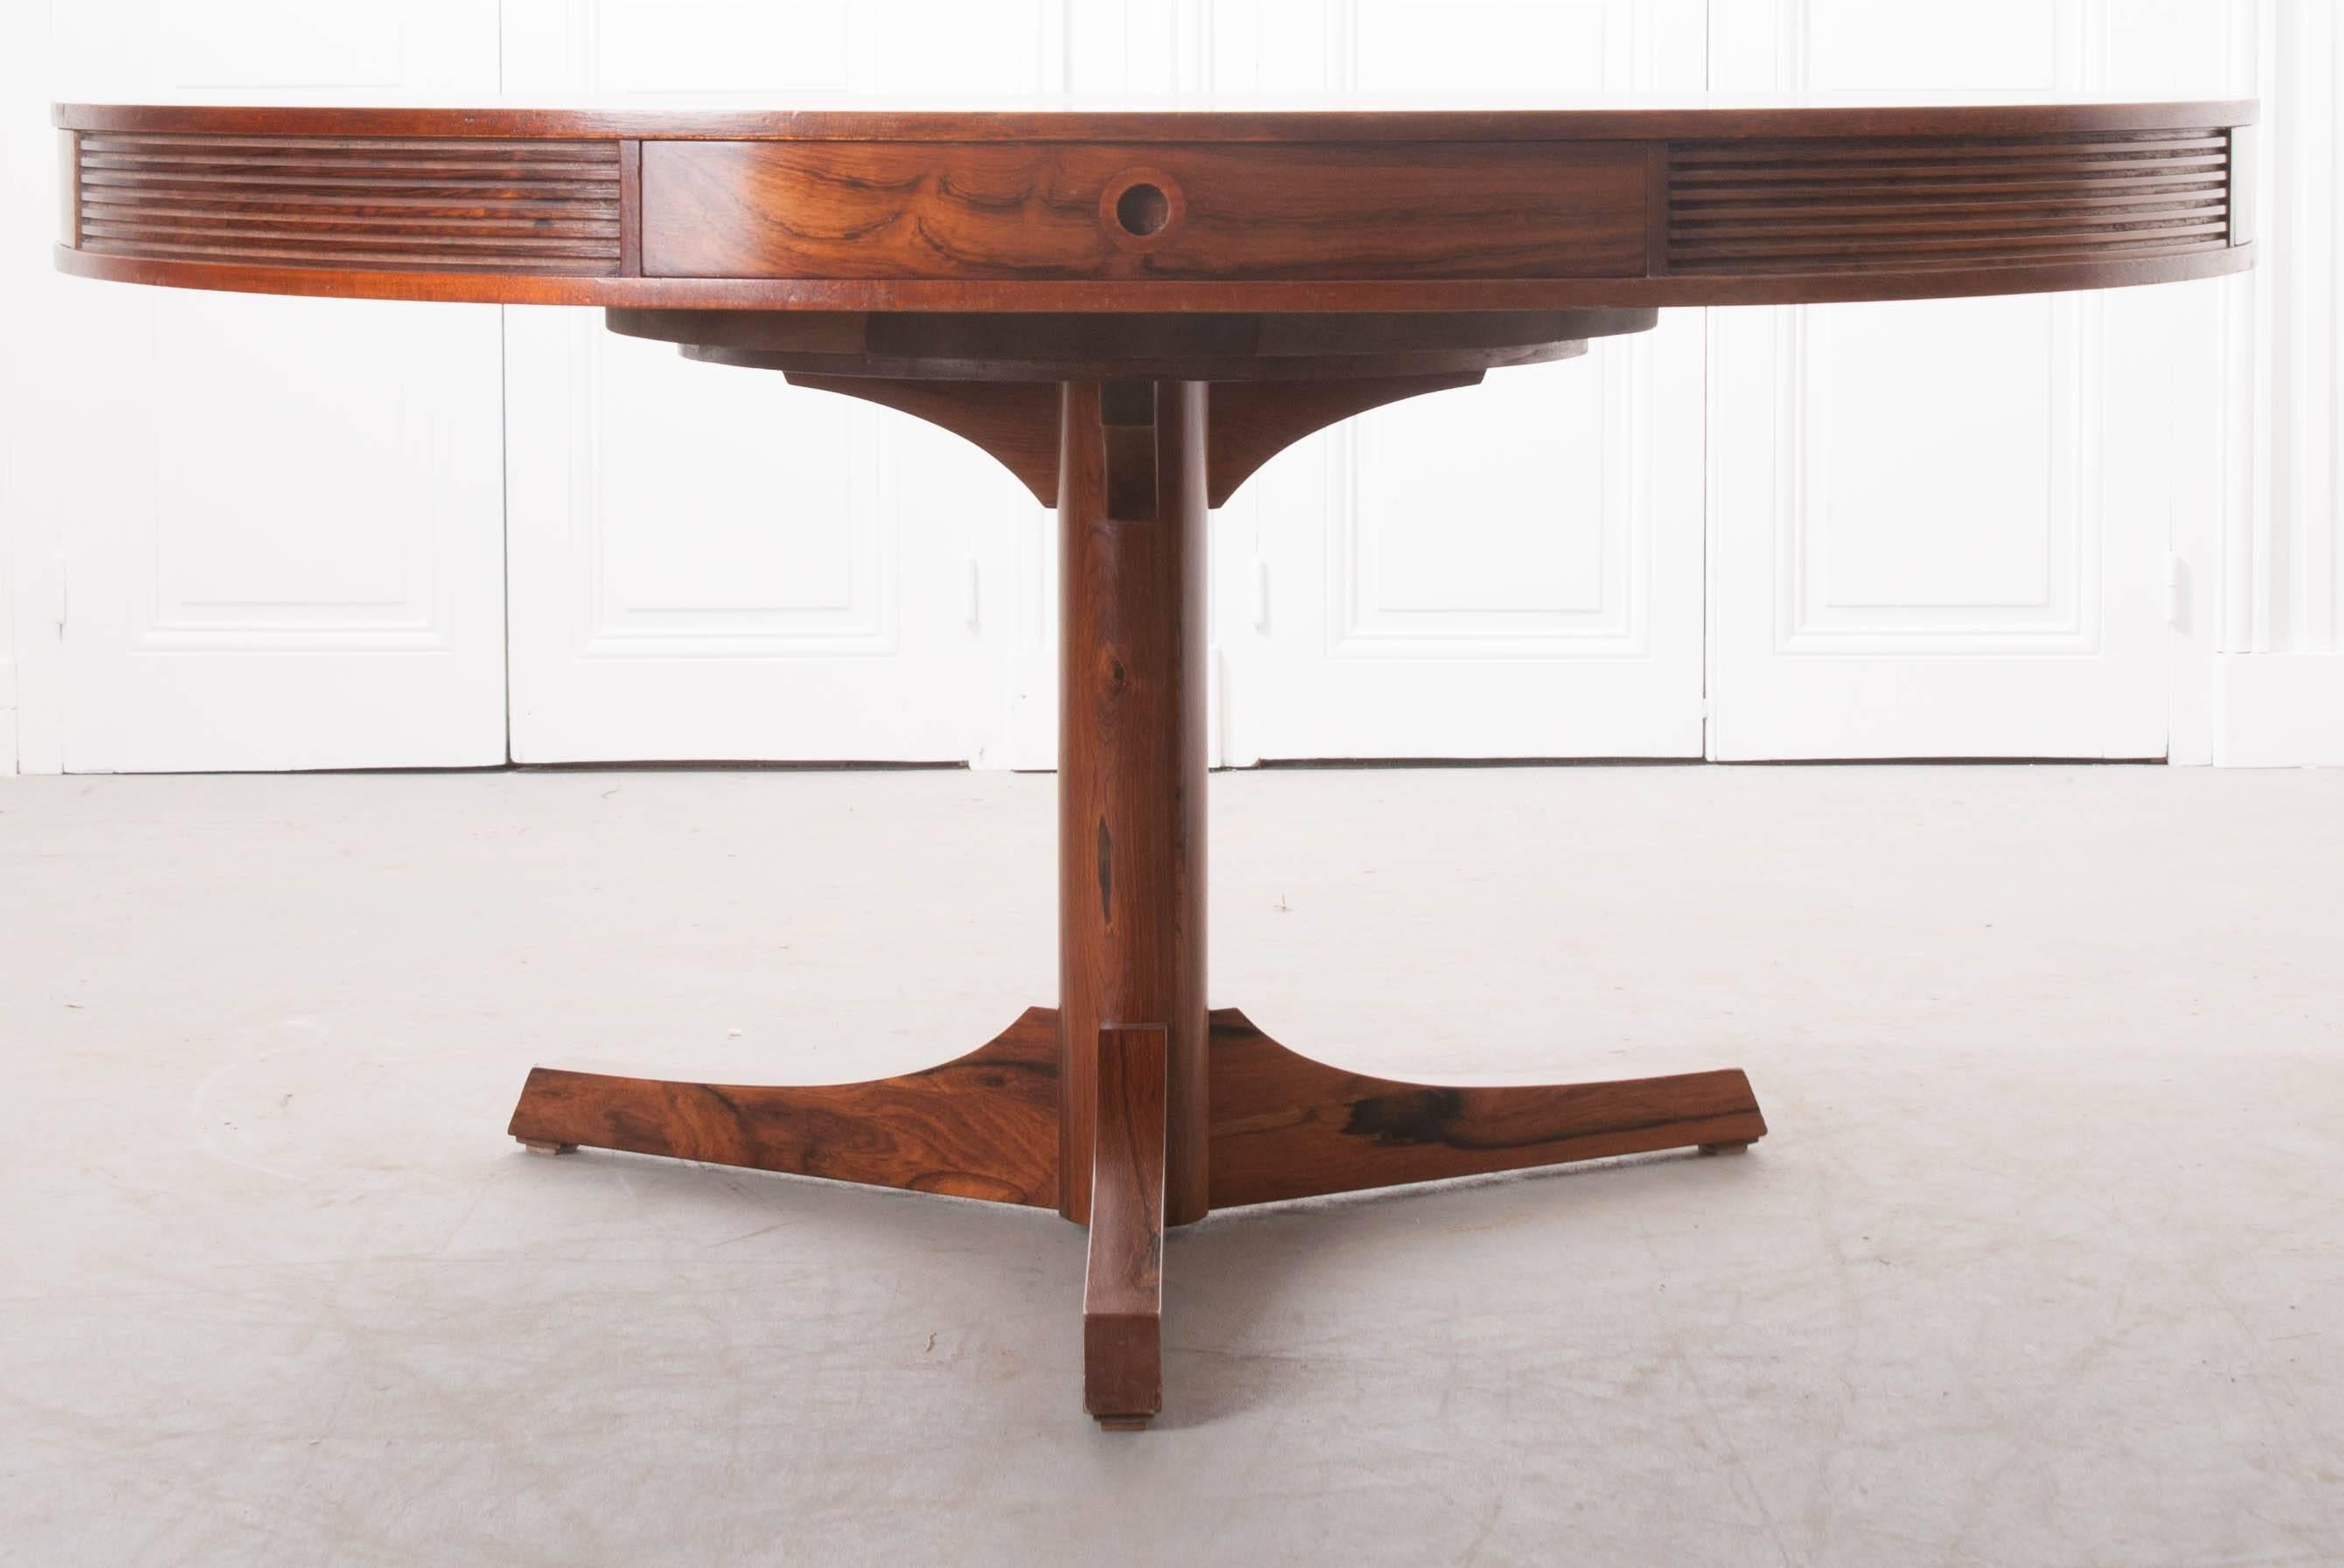 A stylish round dining table, made in England, in the early 1960s. This remarkable piece is made of Brazilian rosewood, which has stunning grain and rich, vivid color. The reeded apron contains four drawers with curved fronts and round, recessed